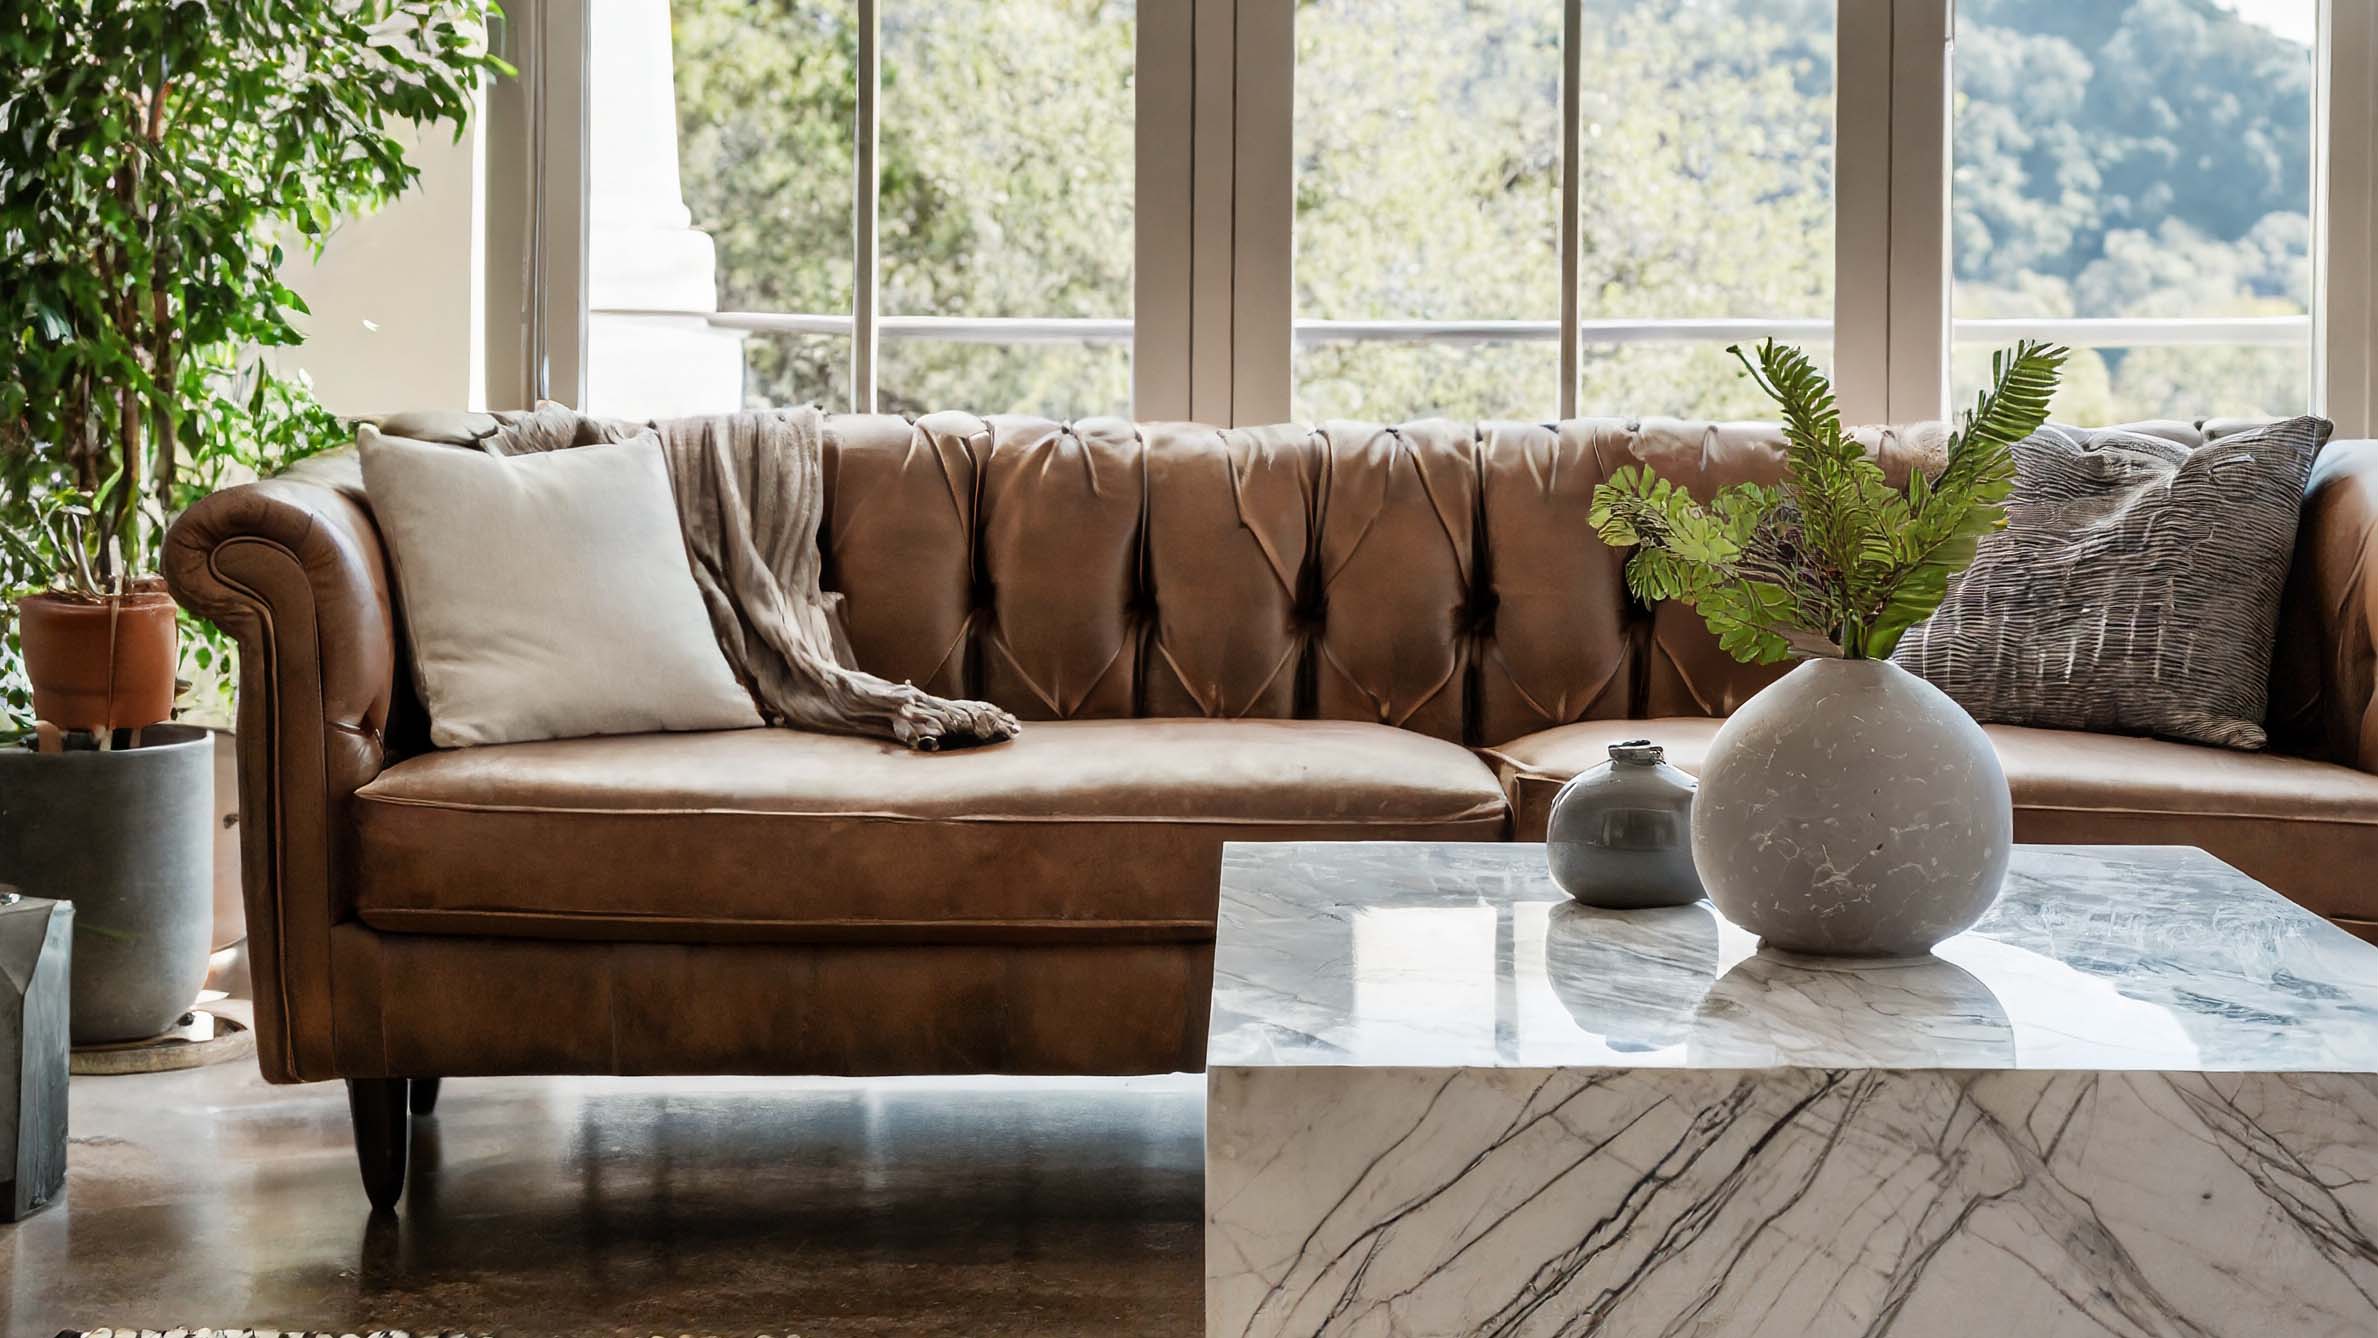 Tufted leather sofa styled with pillows and throw, marble coffee table with vases, plants, bright sunny window.